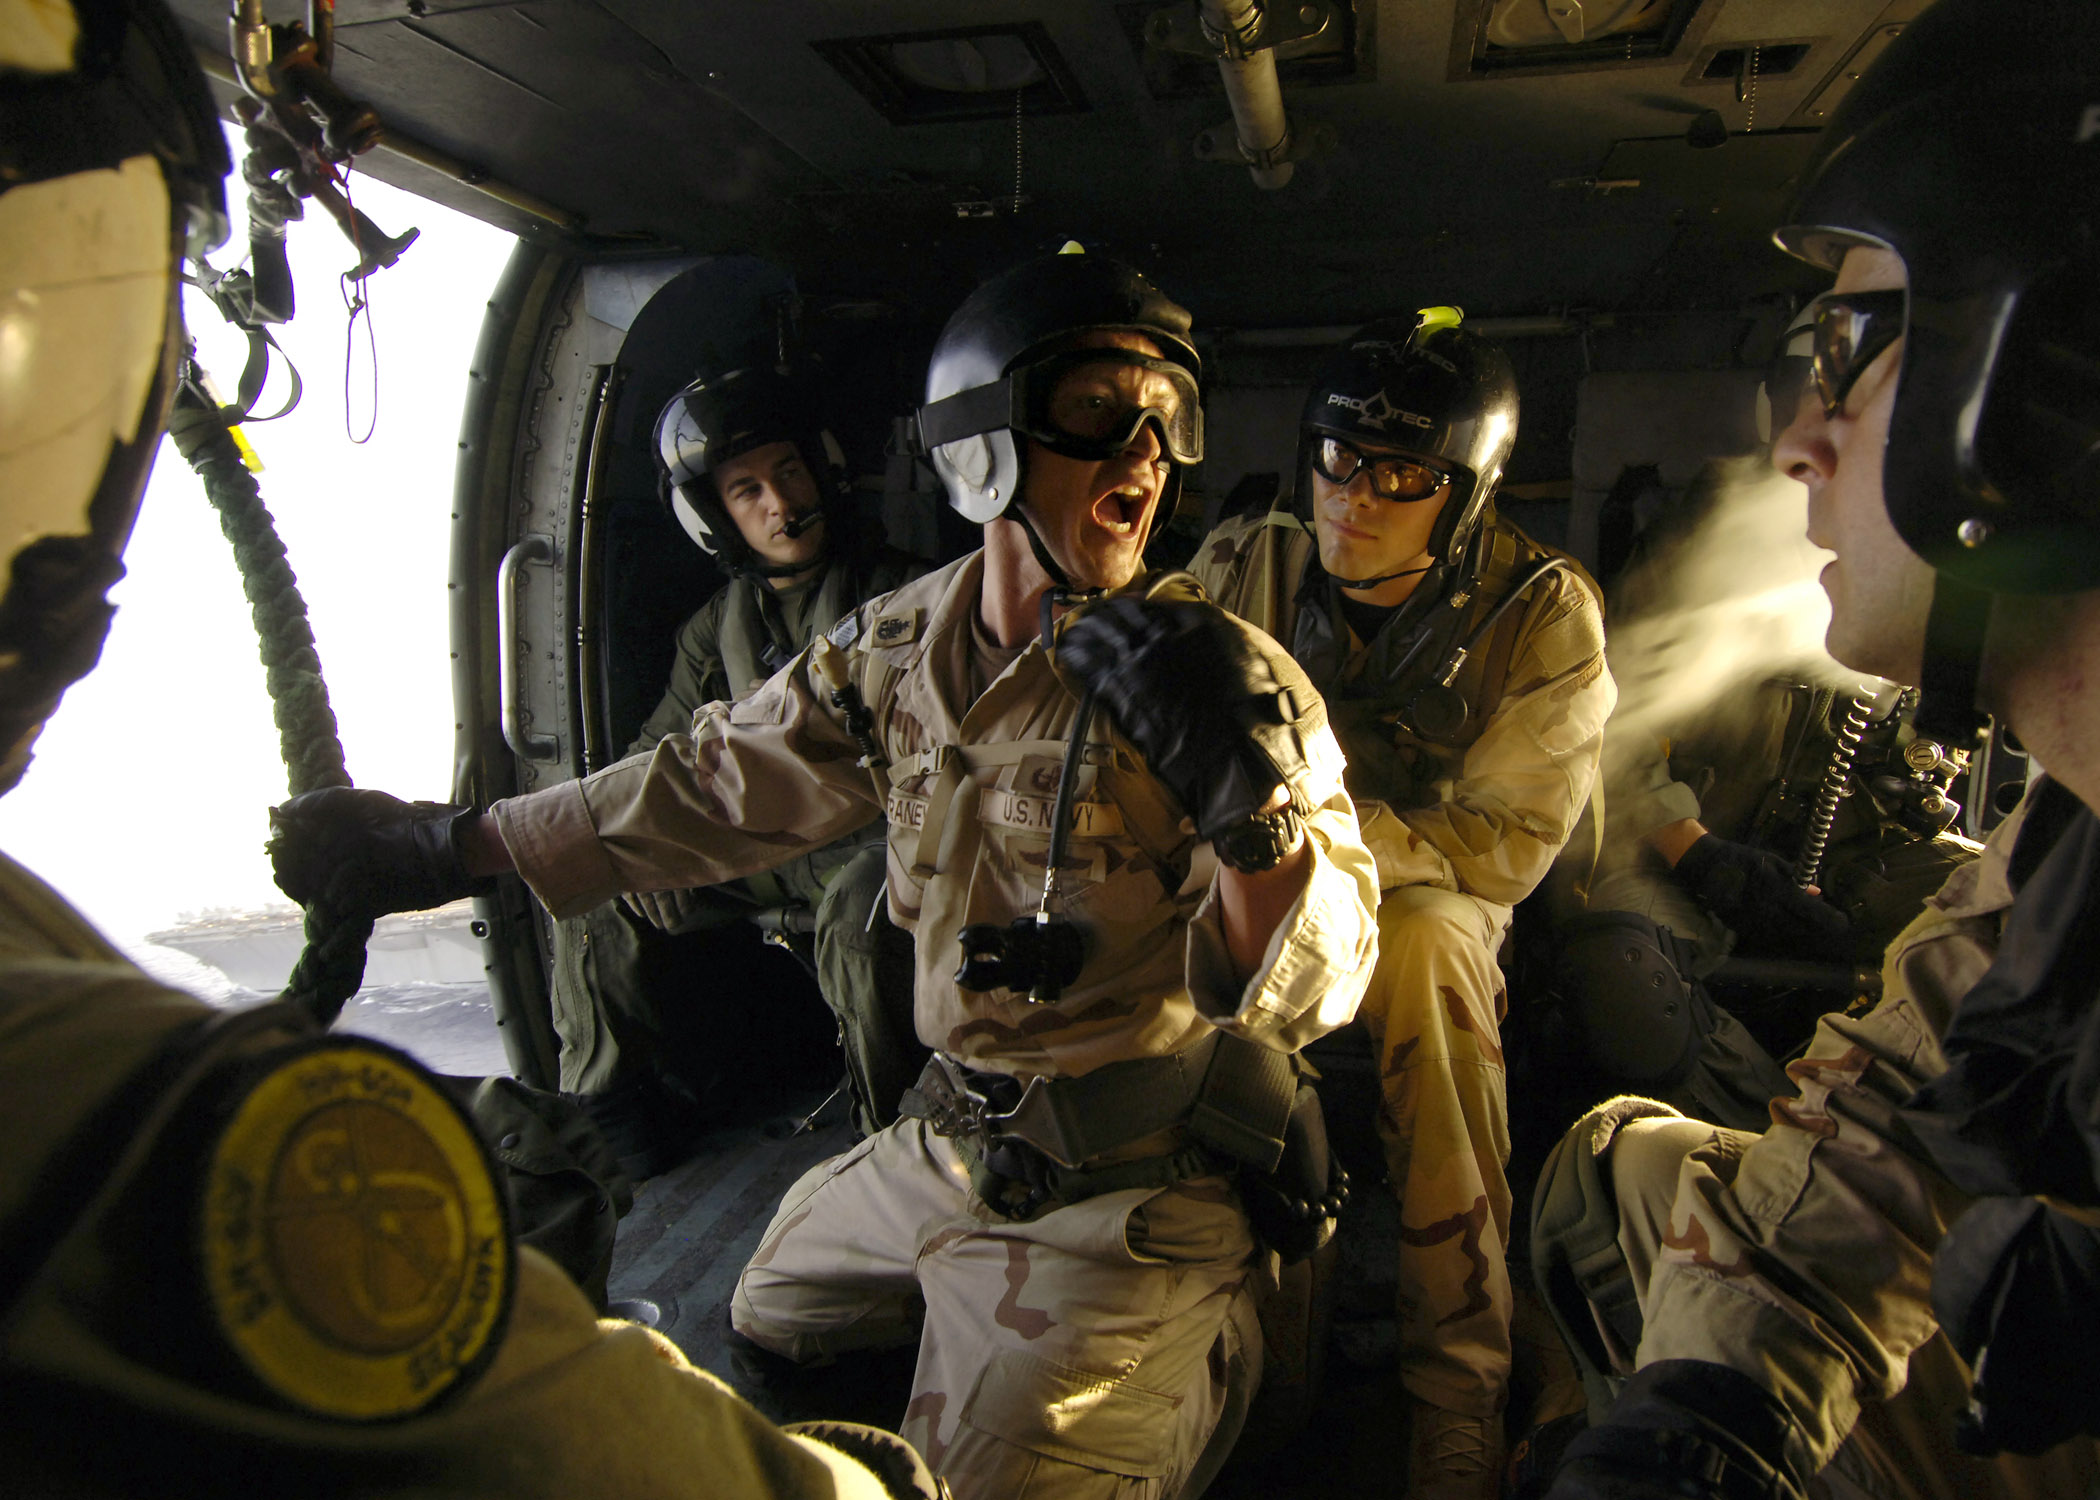 US Navy 060530-N-9742R-215 Senior Chief Electronics Technician Rick Straney, center, assigned to Explosive Ordnance Disposal Mobile Unit Six (EODMU-6) Detachment 14, shouts orders to members